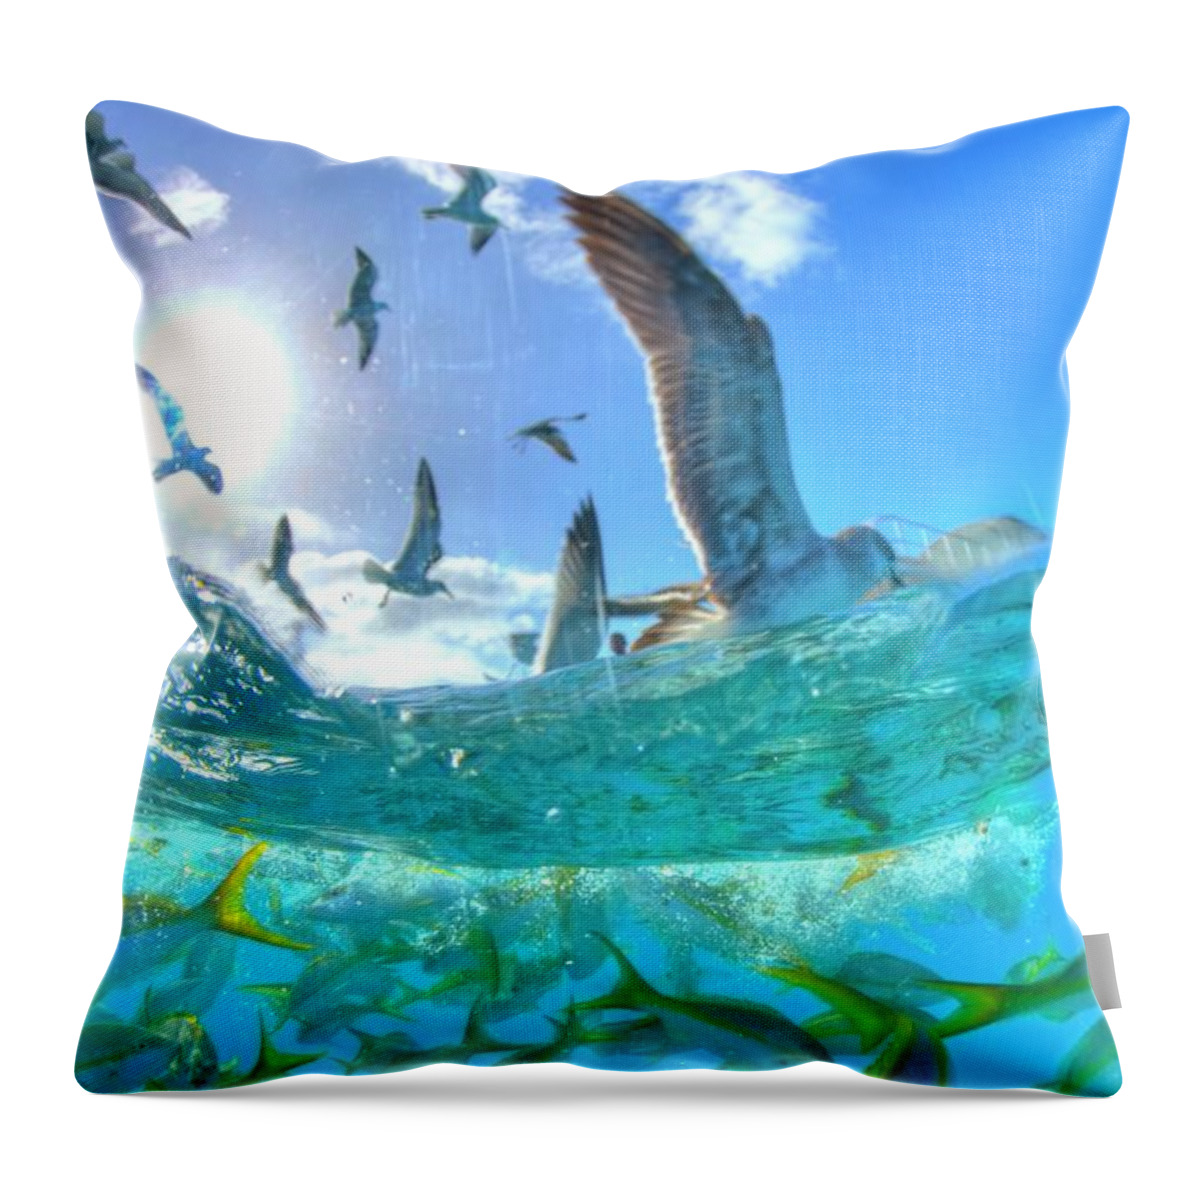 Animal Themes Throw Pillow featuring the photograph Seagulls And Reef Fish by M. Gungen Photography